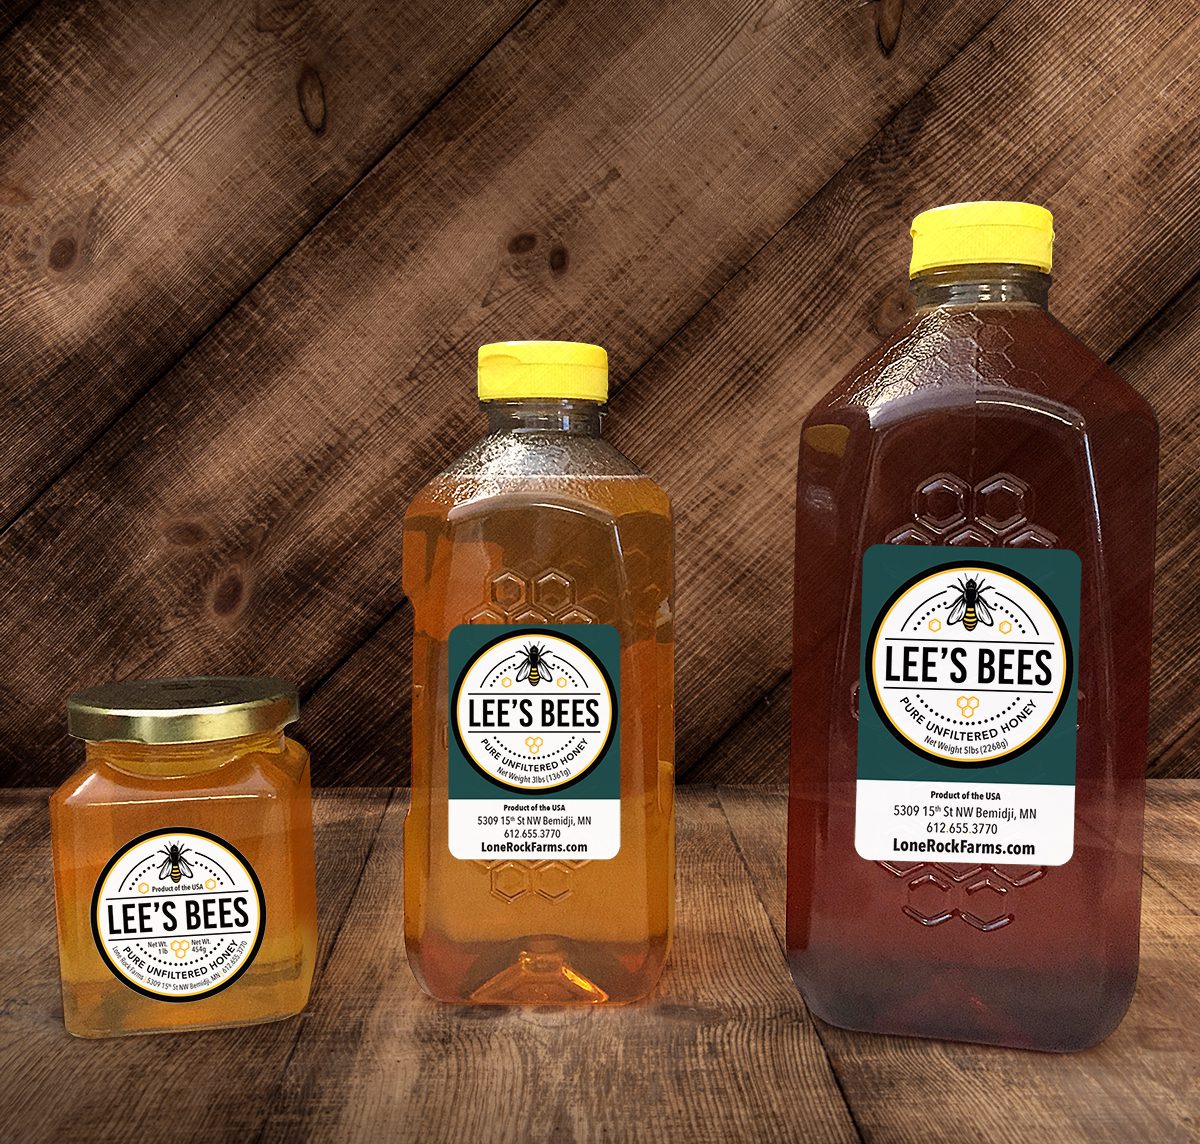 Lee's Bees honey bottles with logo stickers